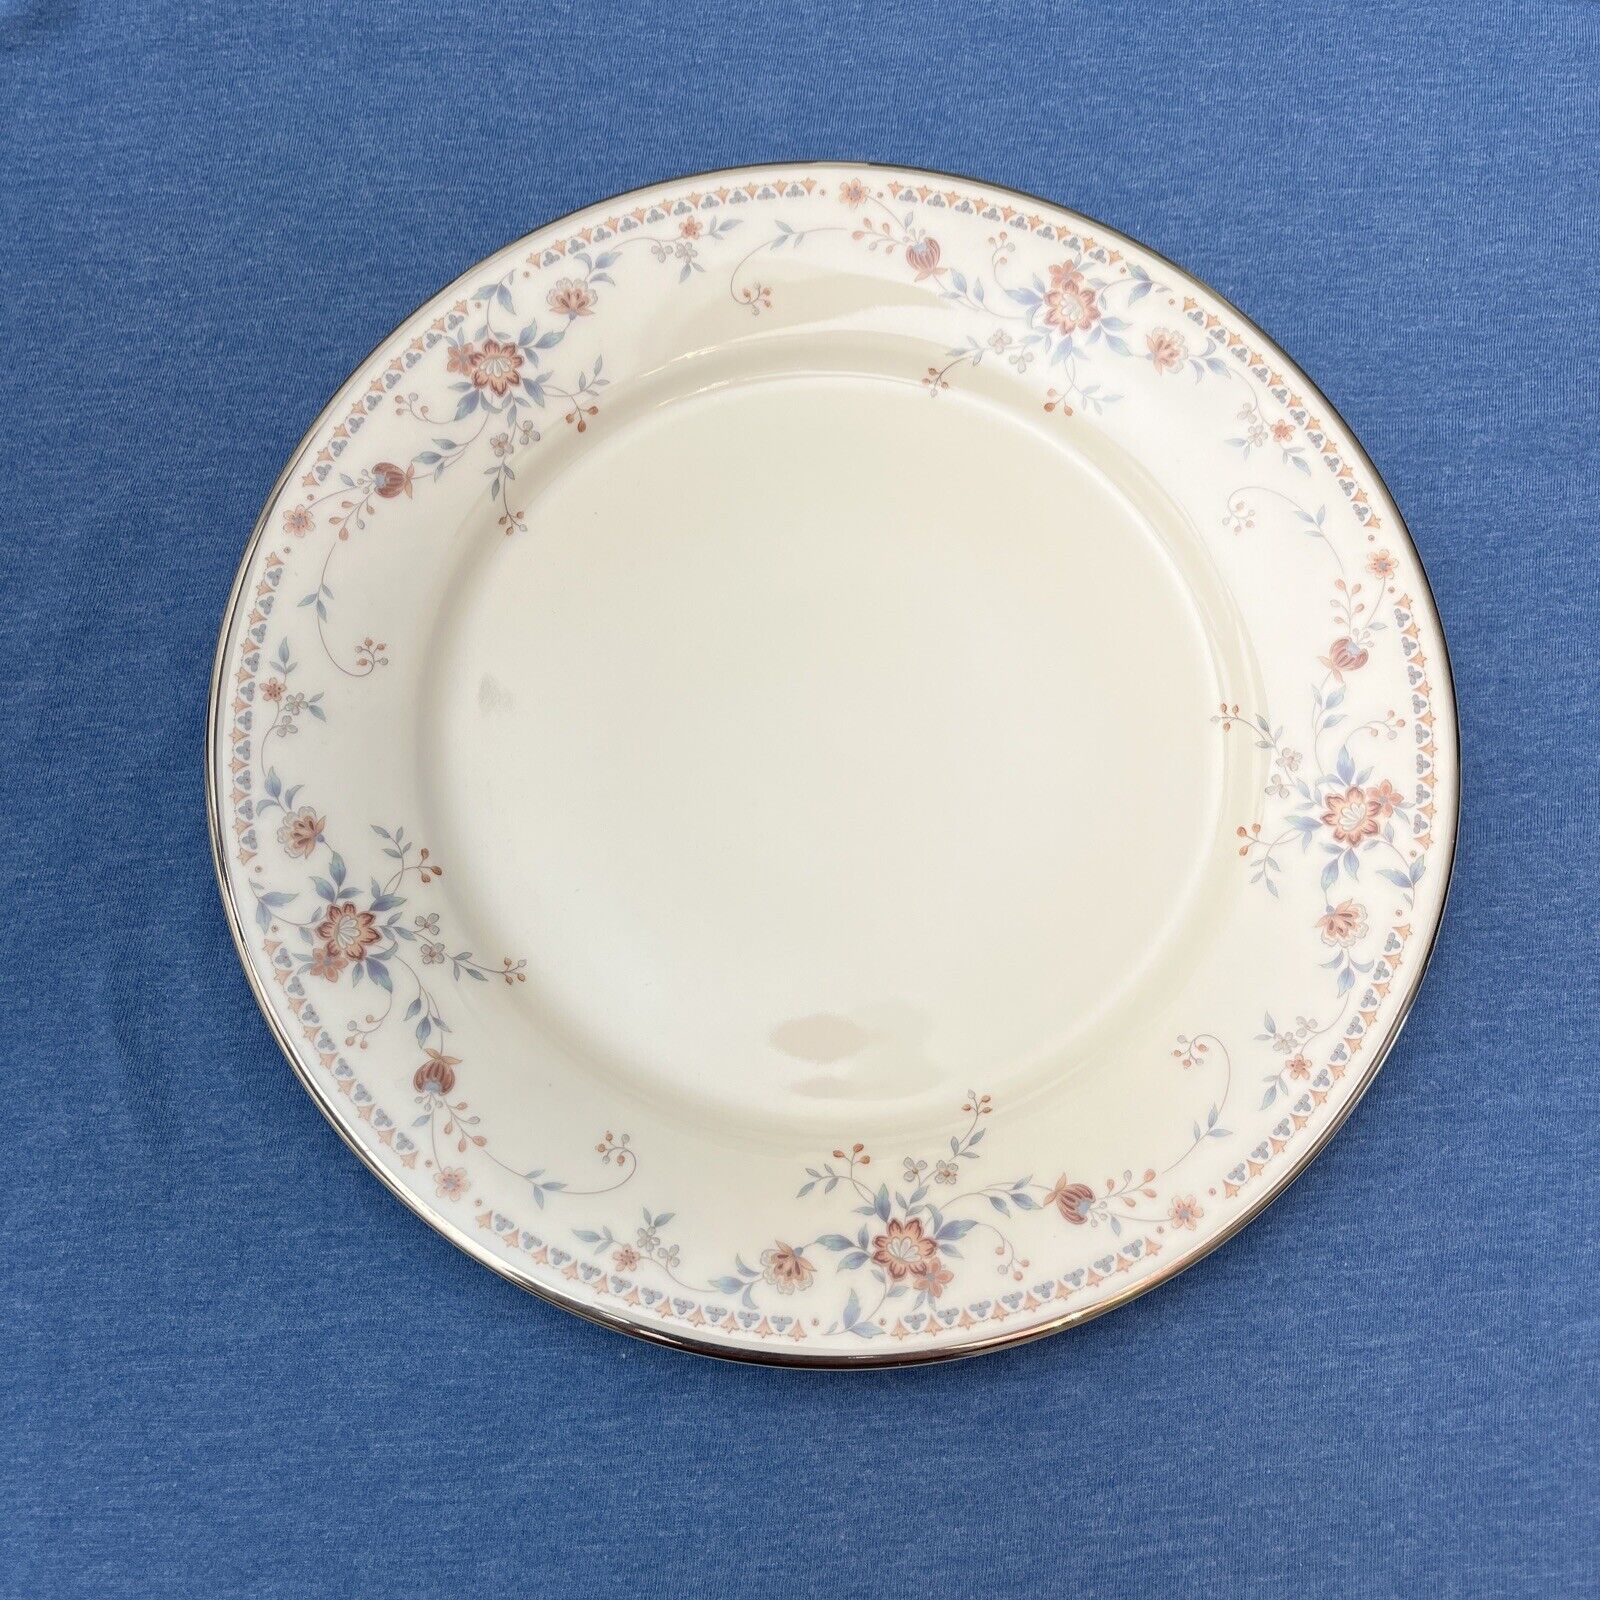 10 Piece Noritake Ivory China ADAGIO 7237 Dinner Plate Set 10.5 in wide Floral